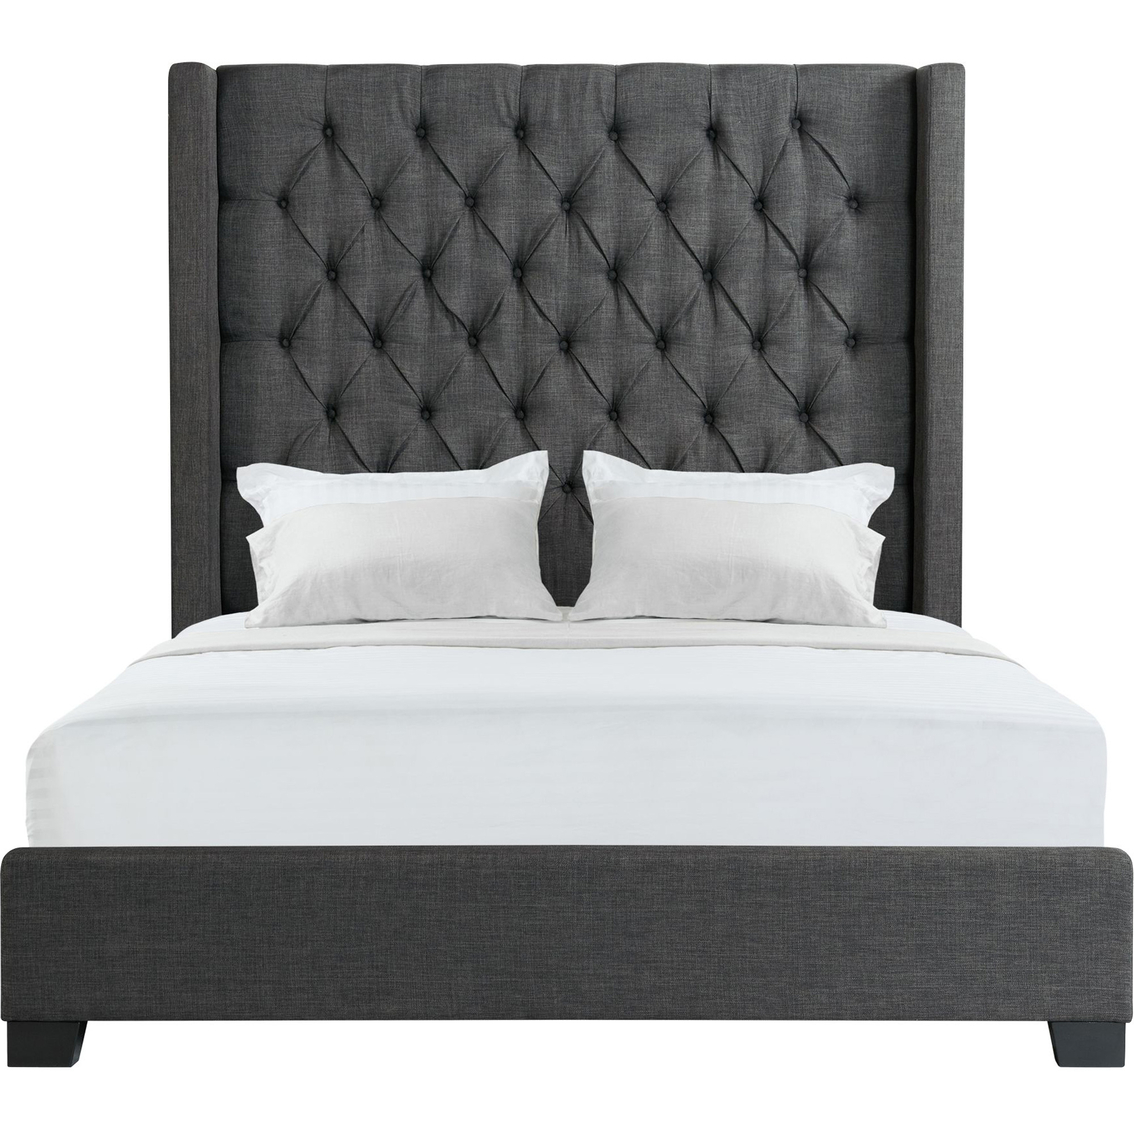 Elements Morrow Bed, Heirloom Charcoal - Image 3 of 7